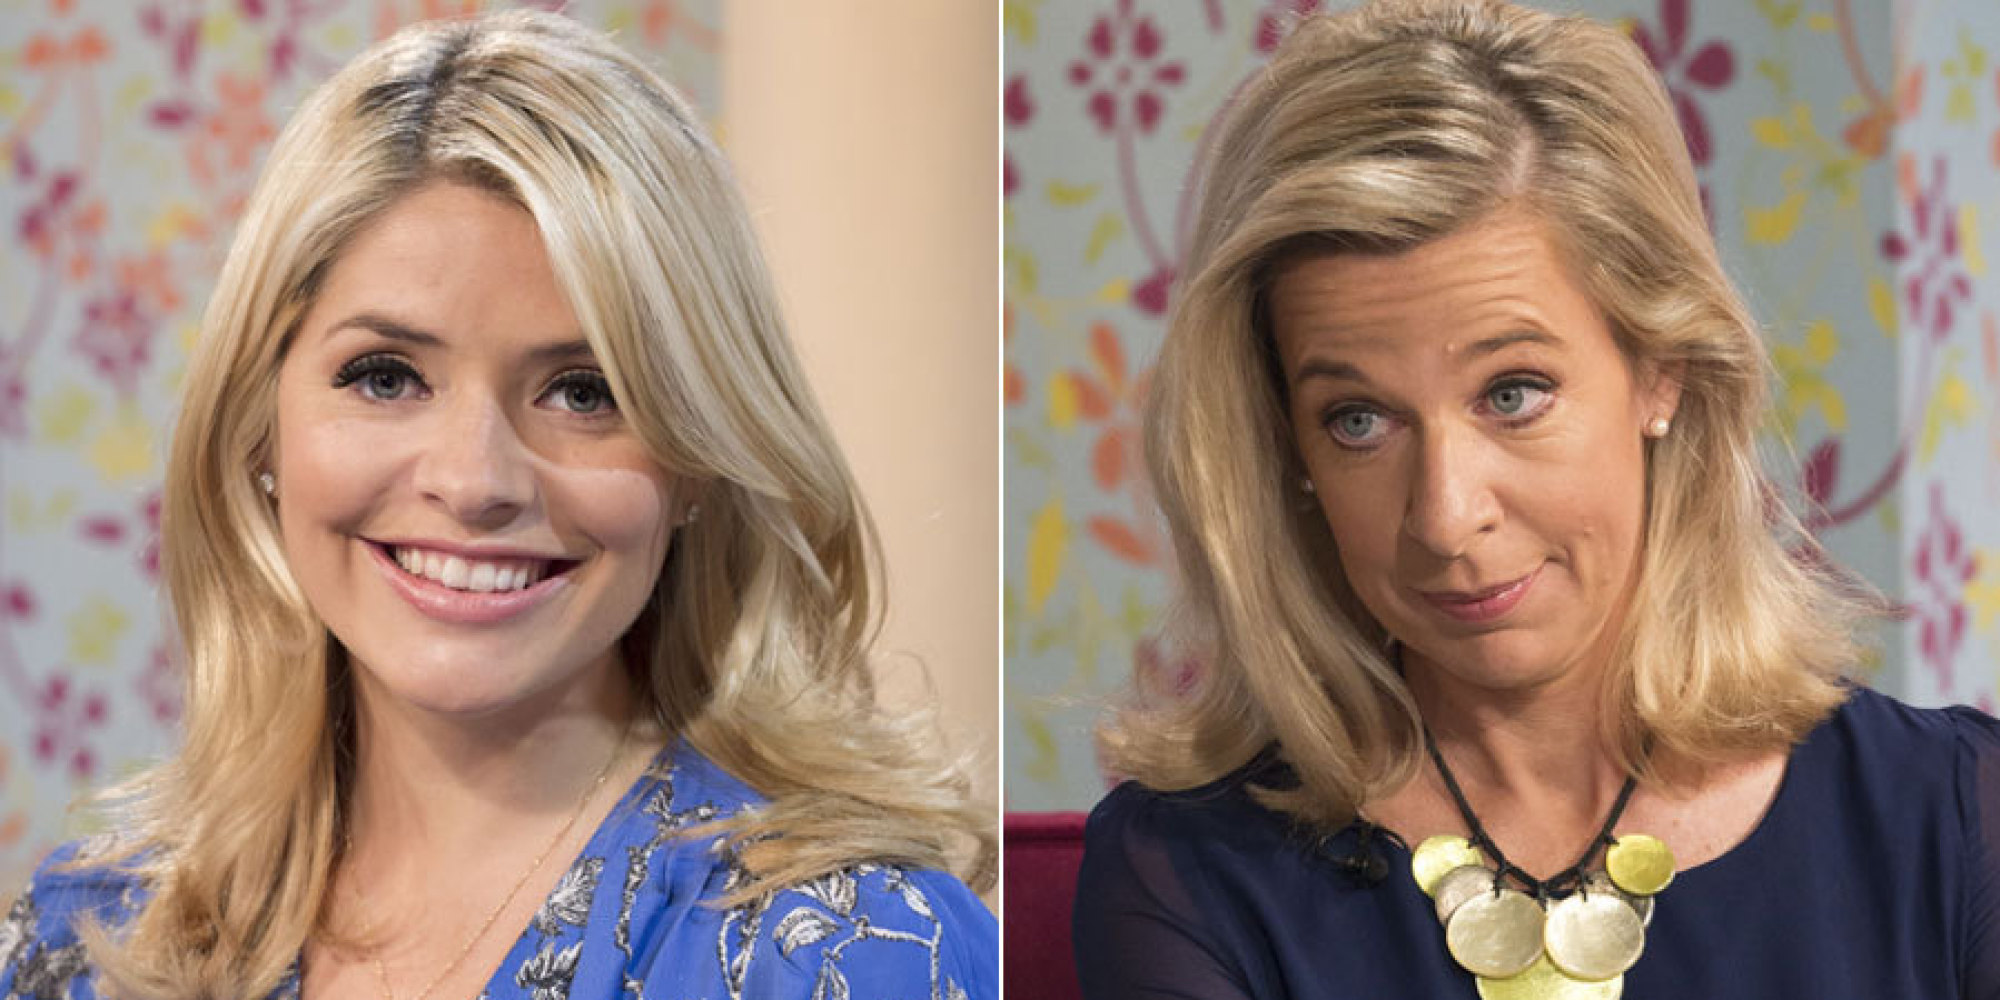 Holly Willoughby On Katie Hopkins: 'I Don't Know What Goes On In Her Head' | HuffPost UK